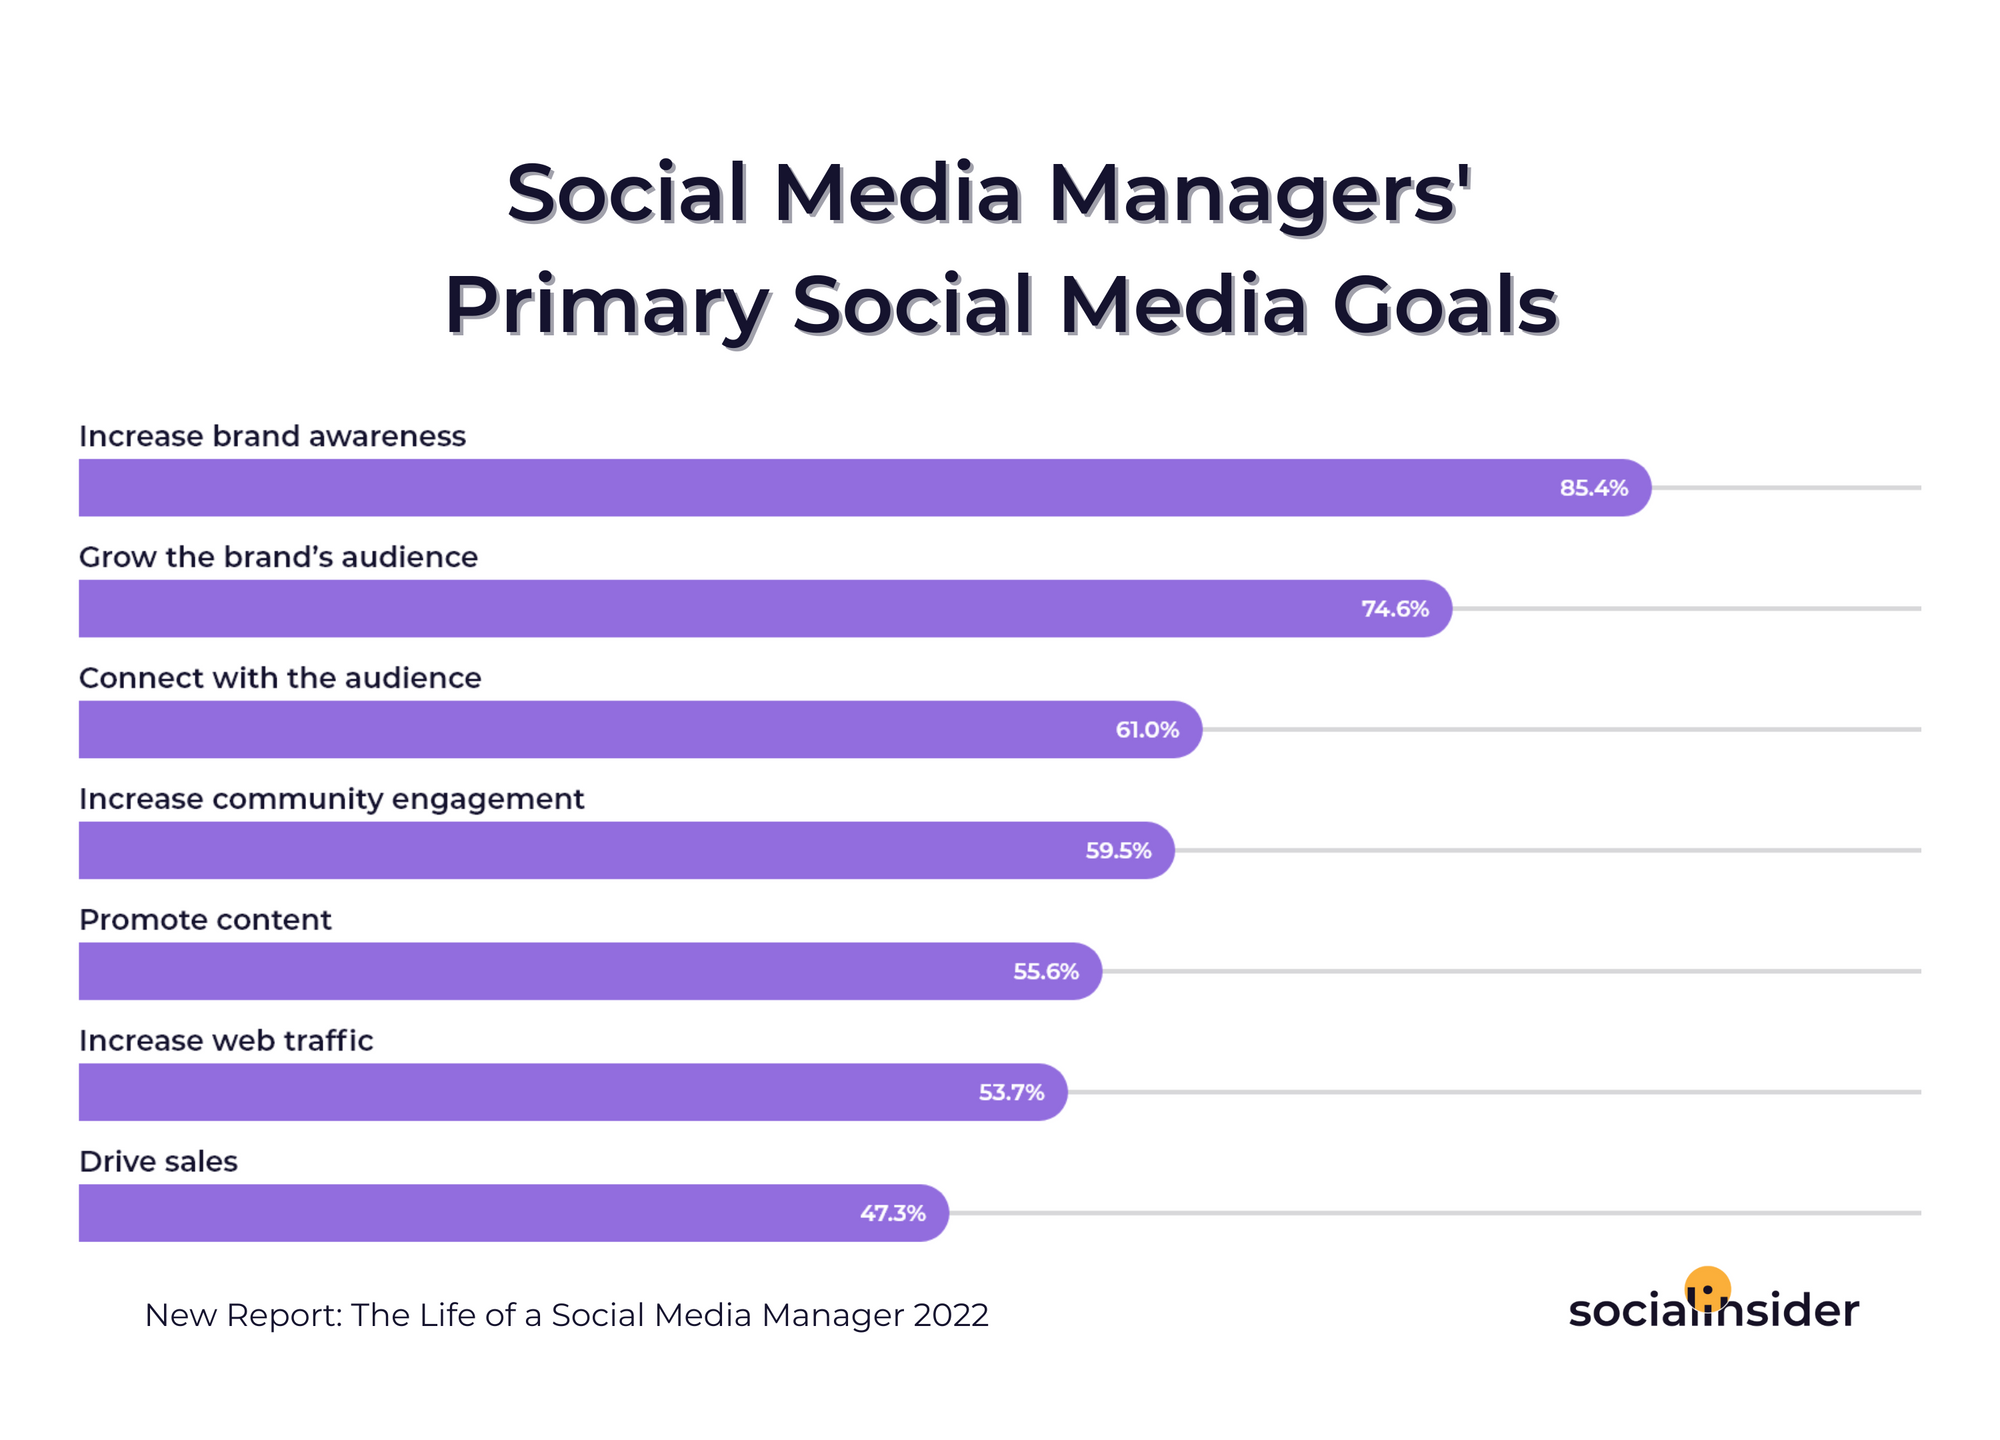 This is a chart showing which are social media managers' primary social media goals